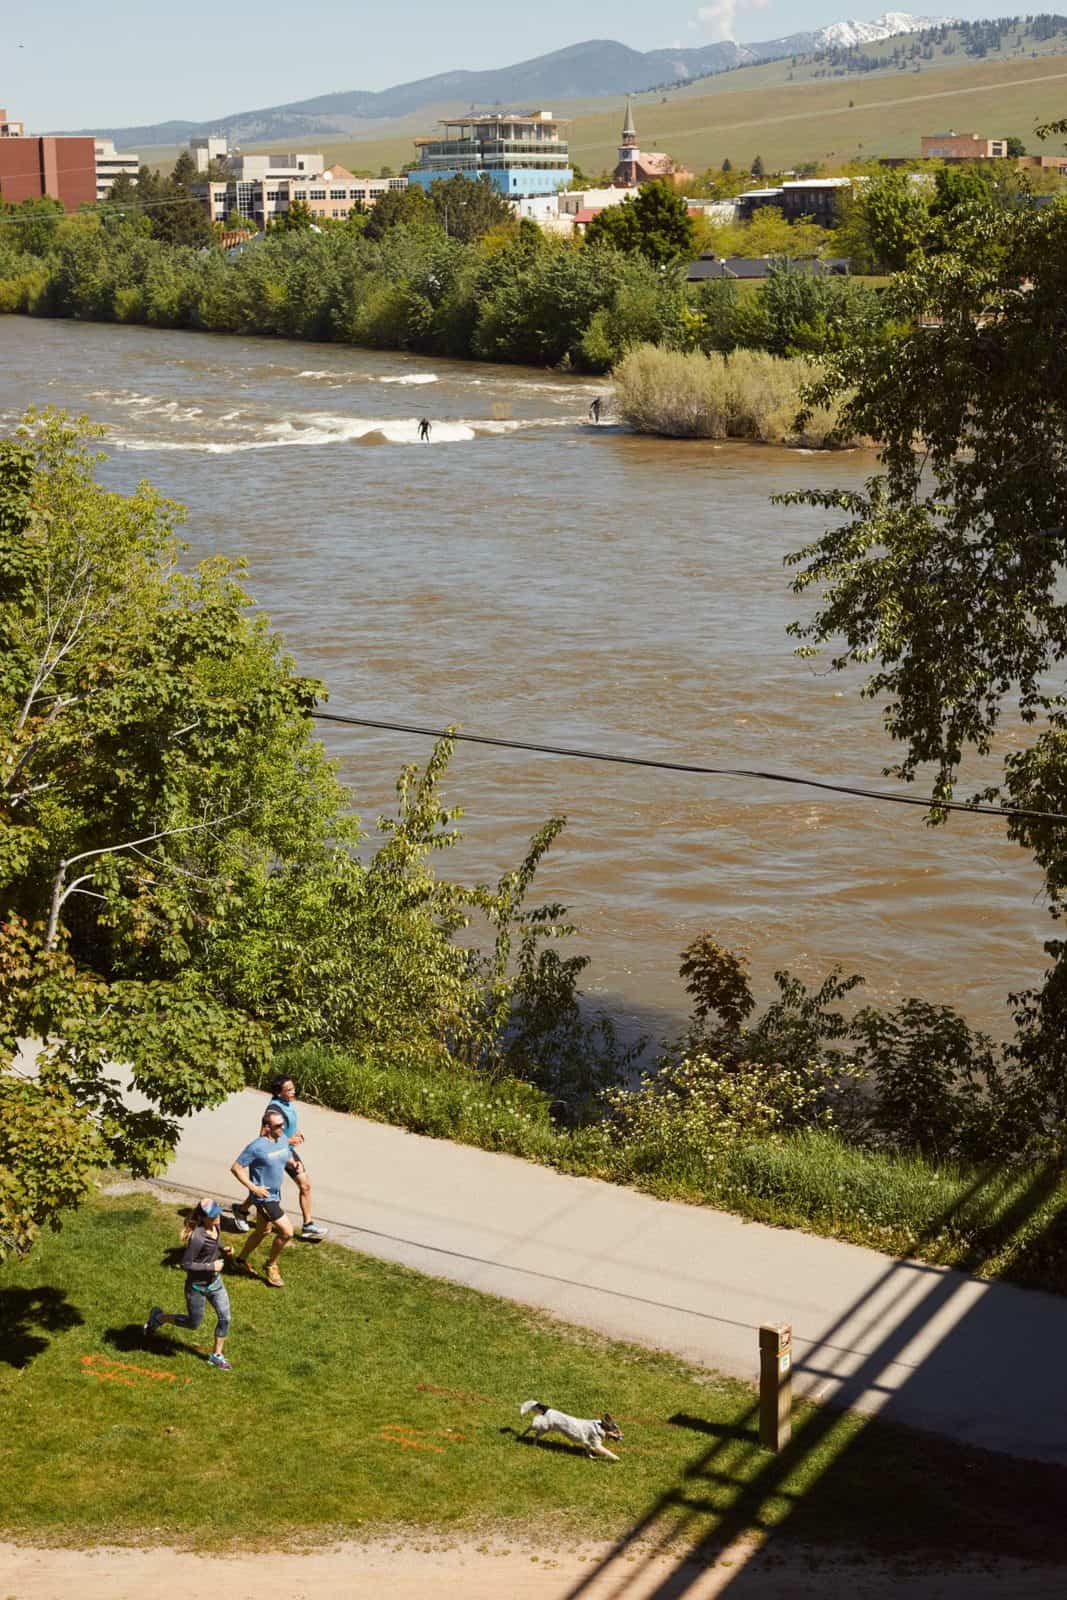 Joggers and surfers at the Clark Fork River in Missoula, Montana